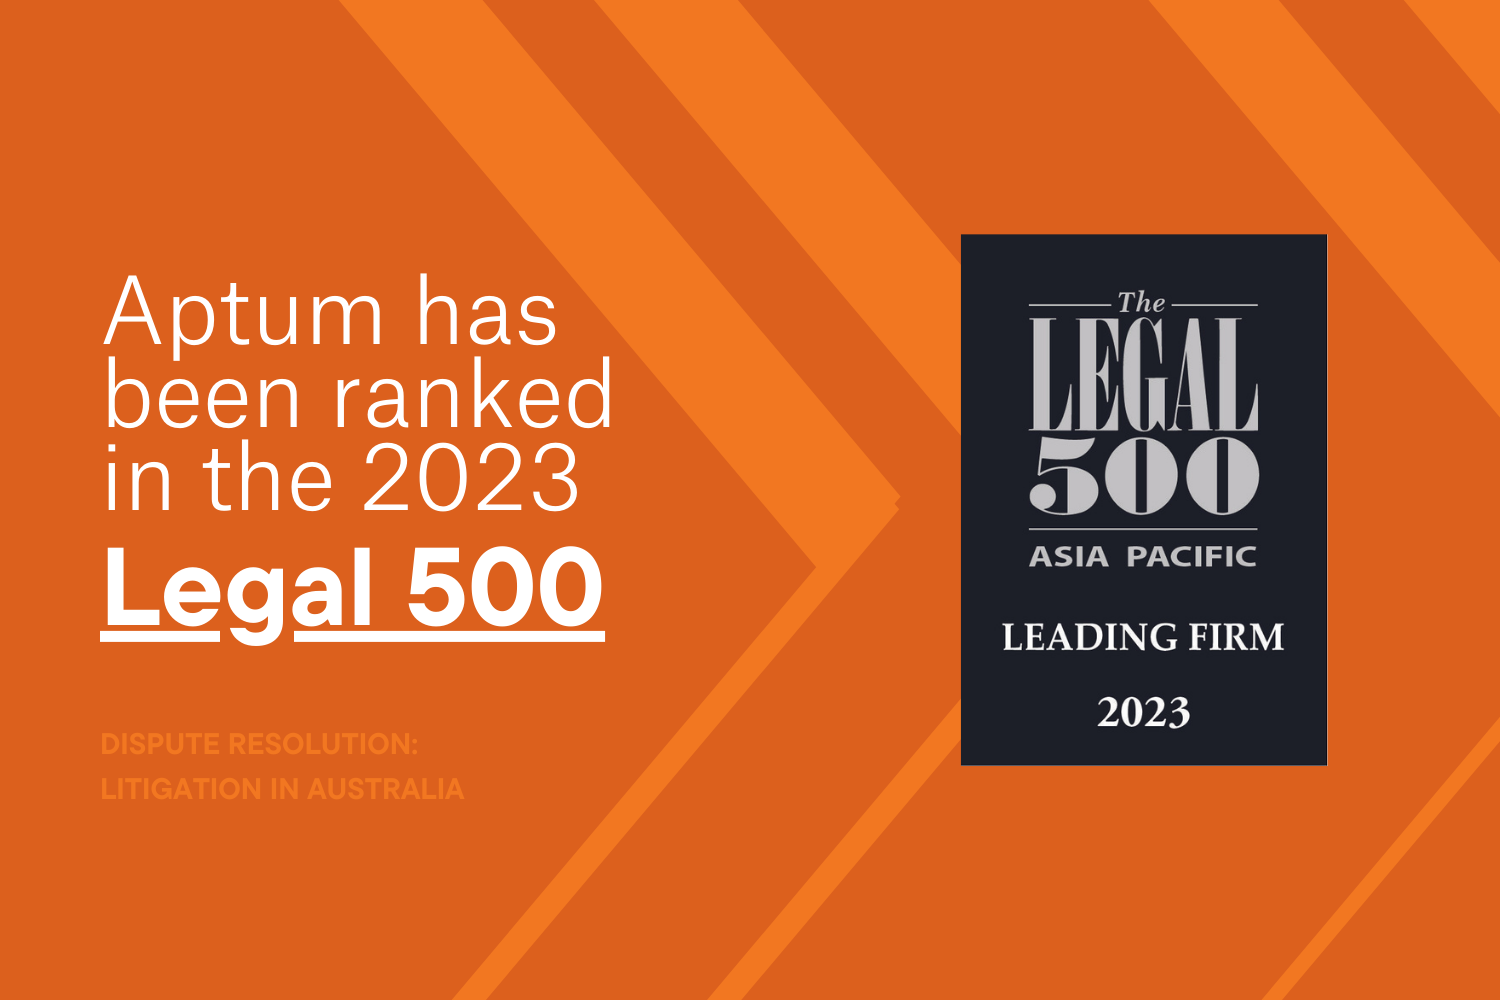 orange background that says 'aptum has been ranked in the 2023 legal 500 on the left with The Legal 500 logo on the right